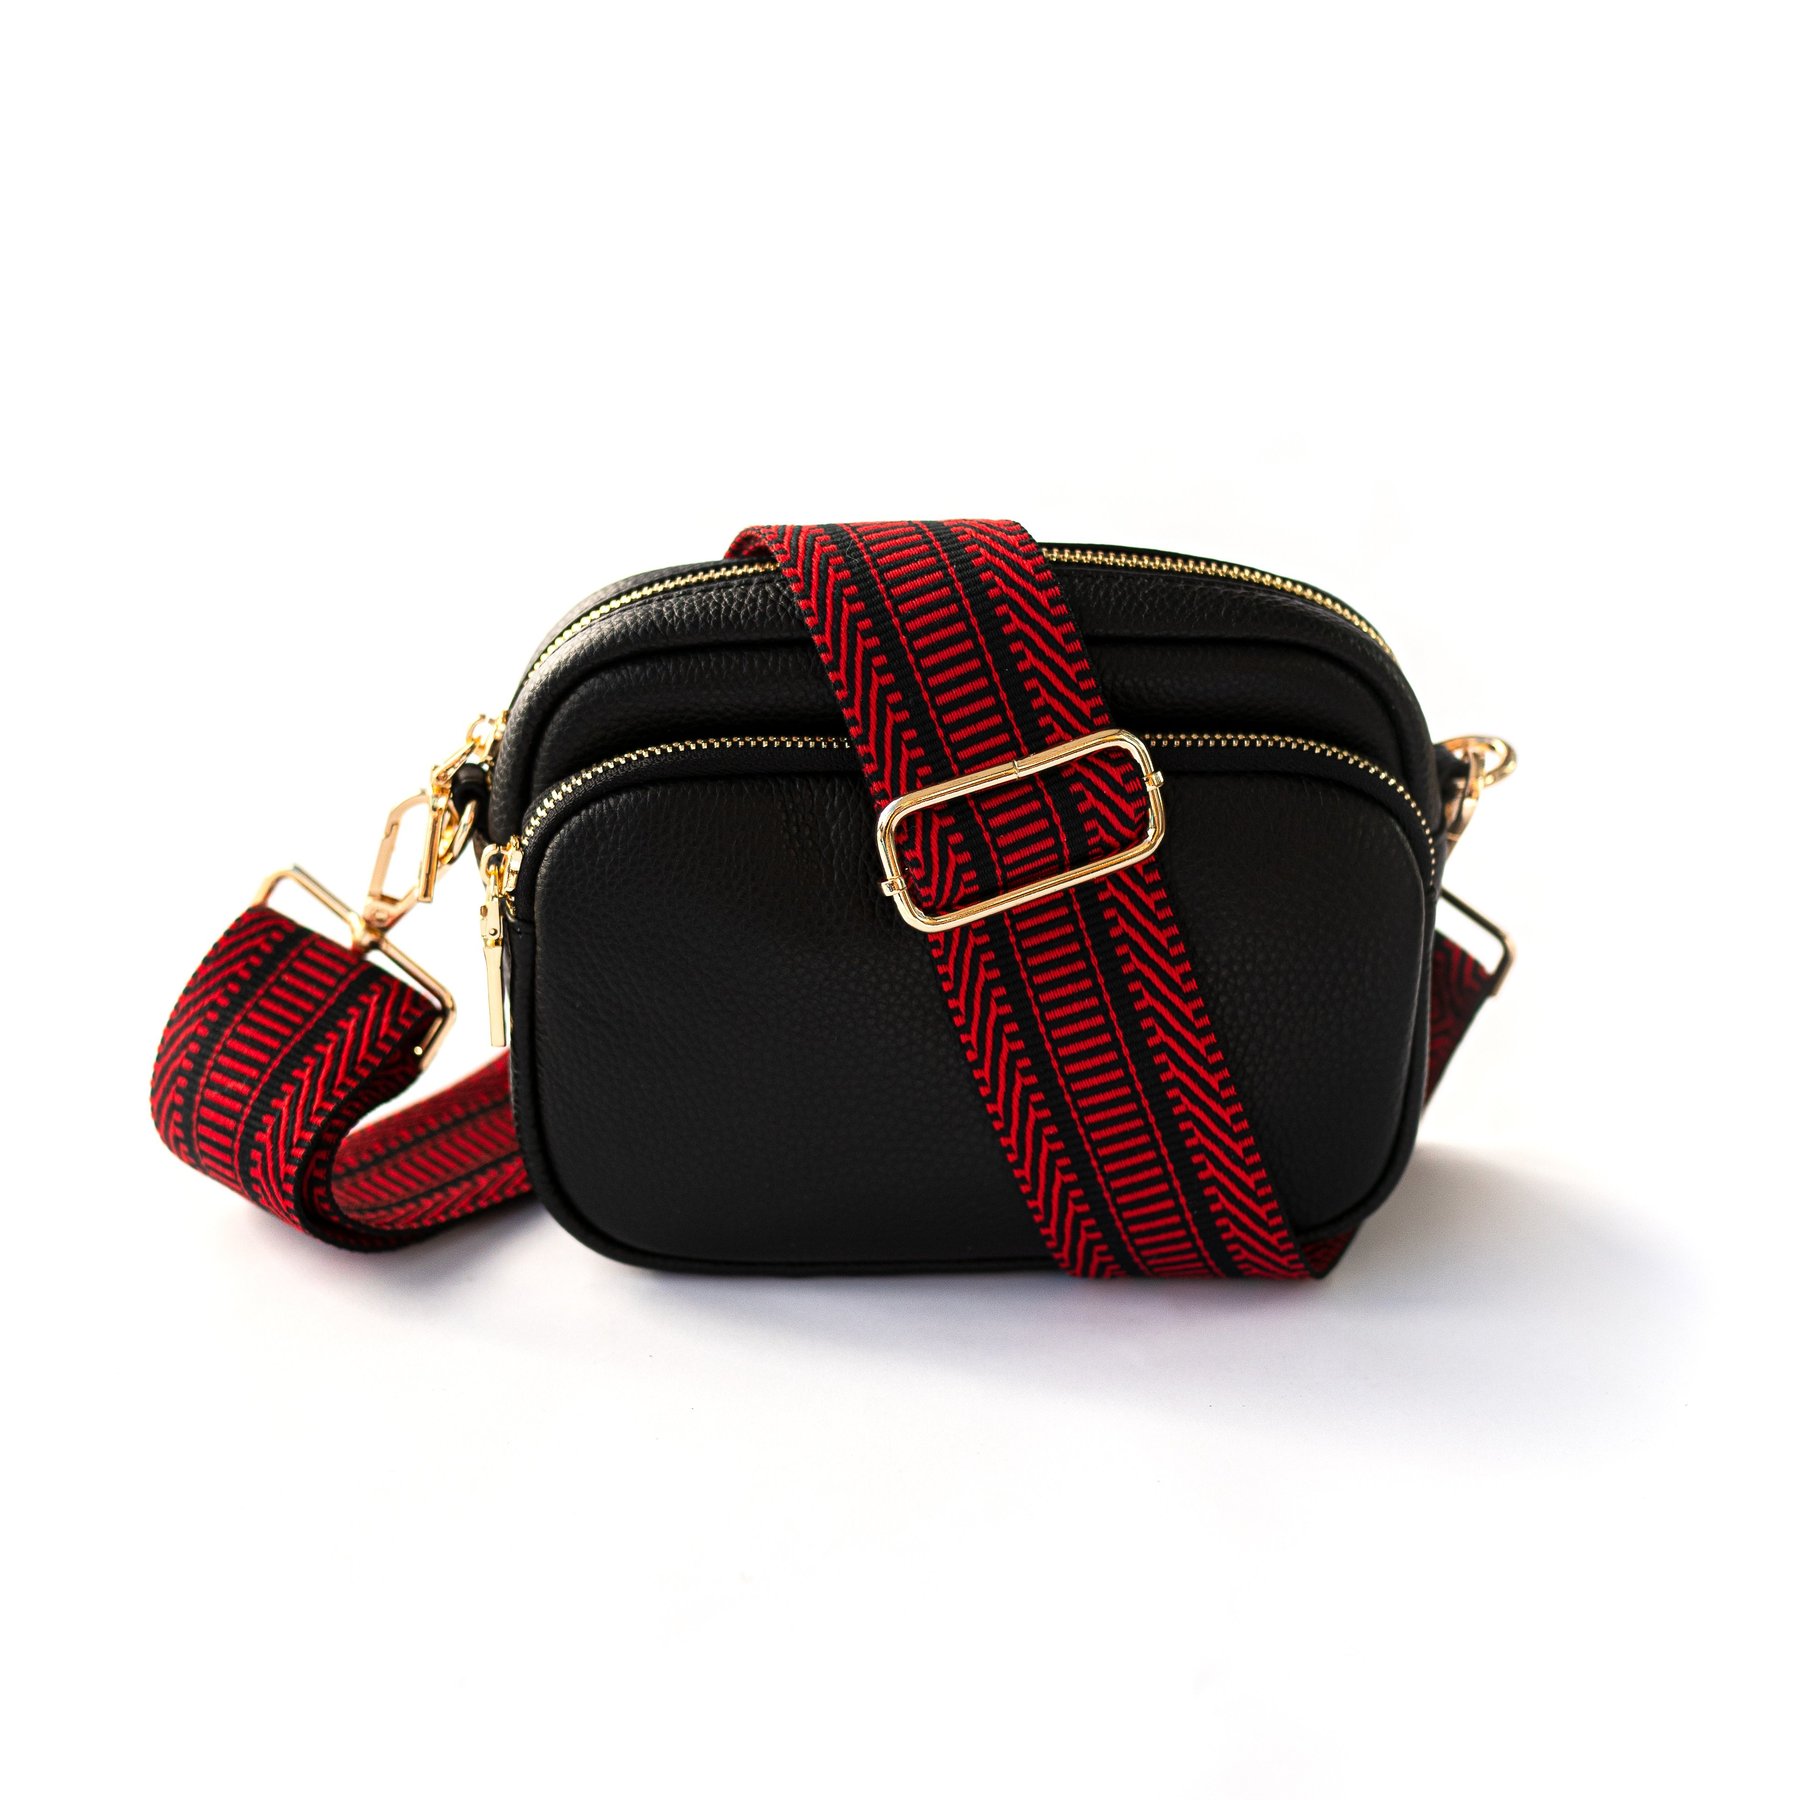 Buy Accessorize London Women's Faux Leather Black Buckle Strap Bar Shoulder  Bag at Amazon.in